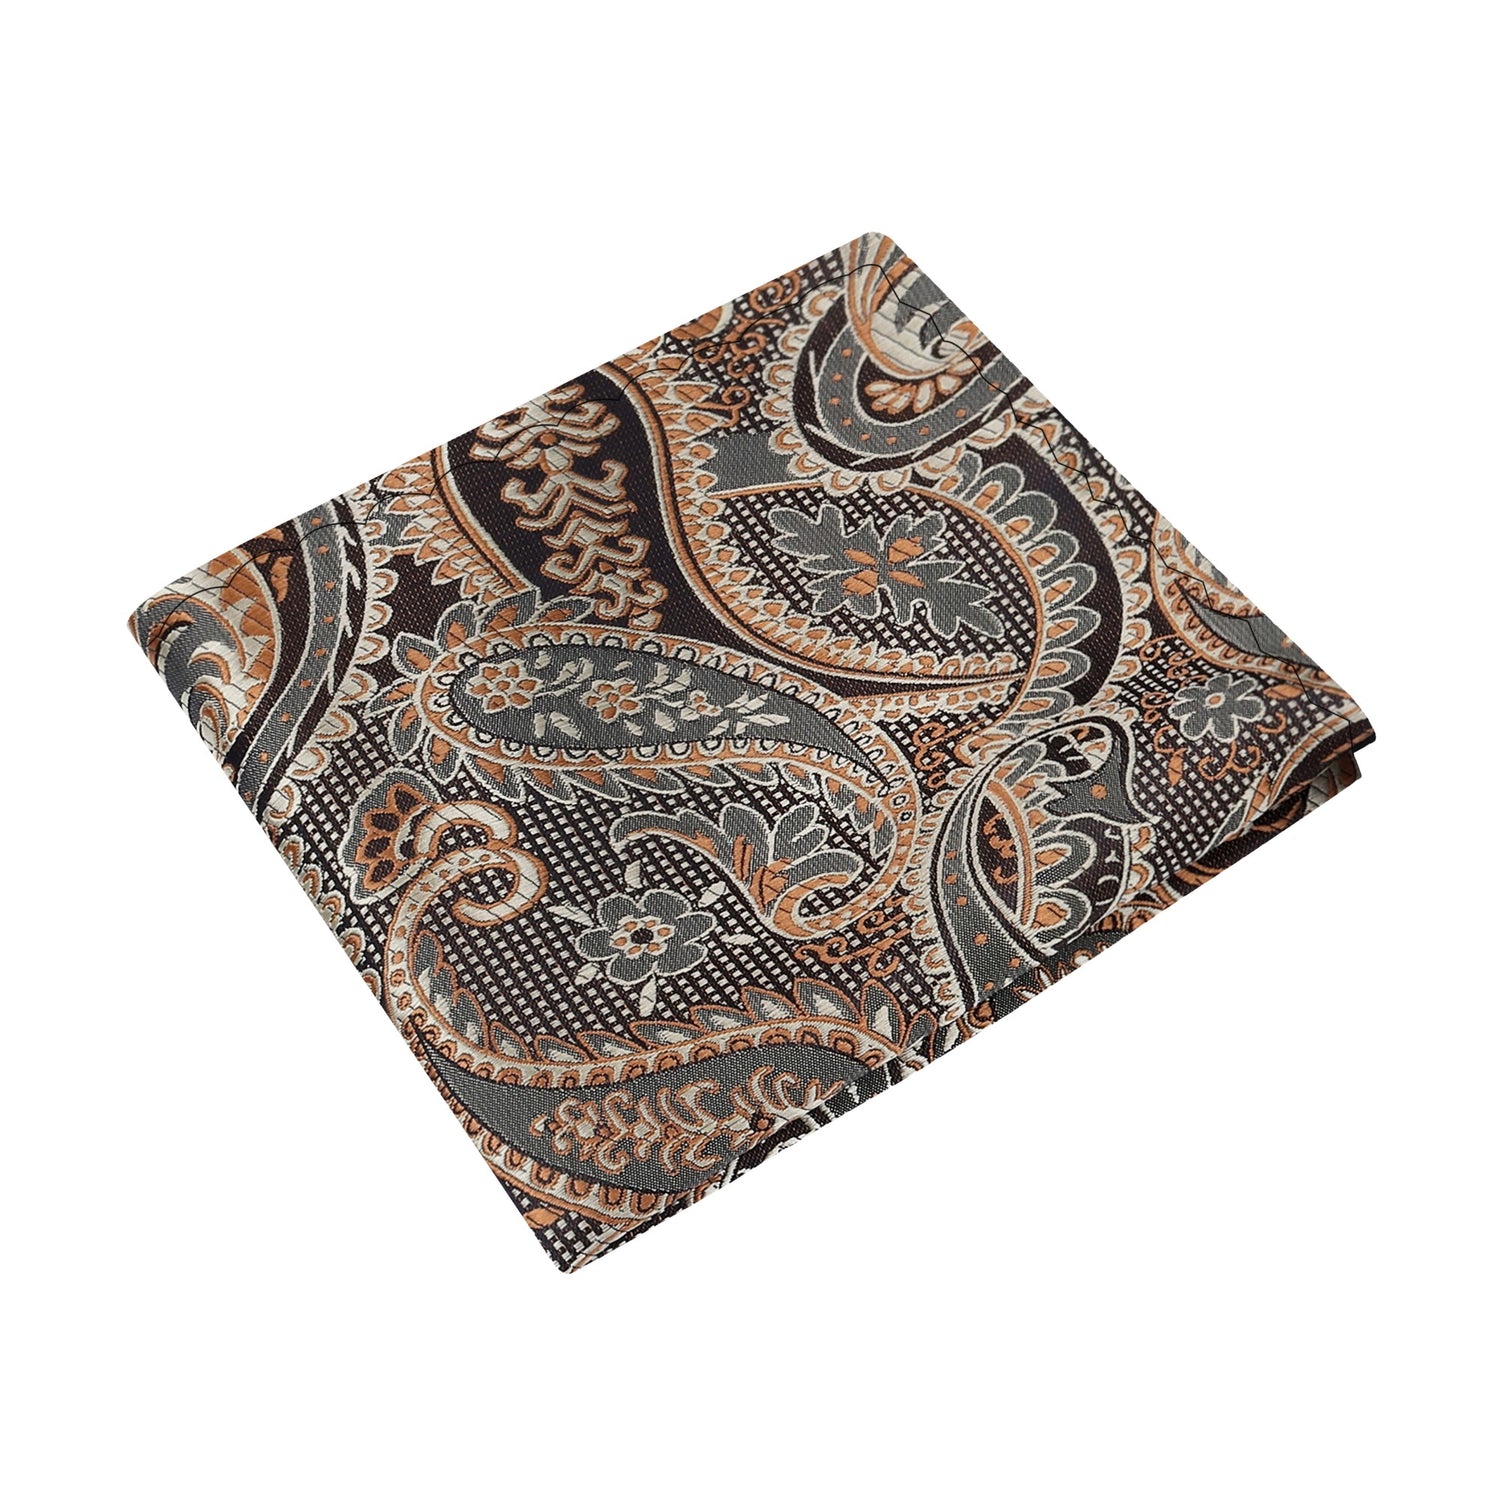 A Brown Paisley With Checks Pattern Silk Pocket Square